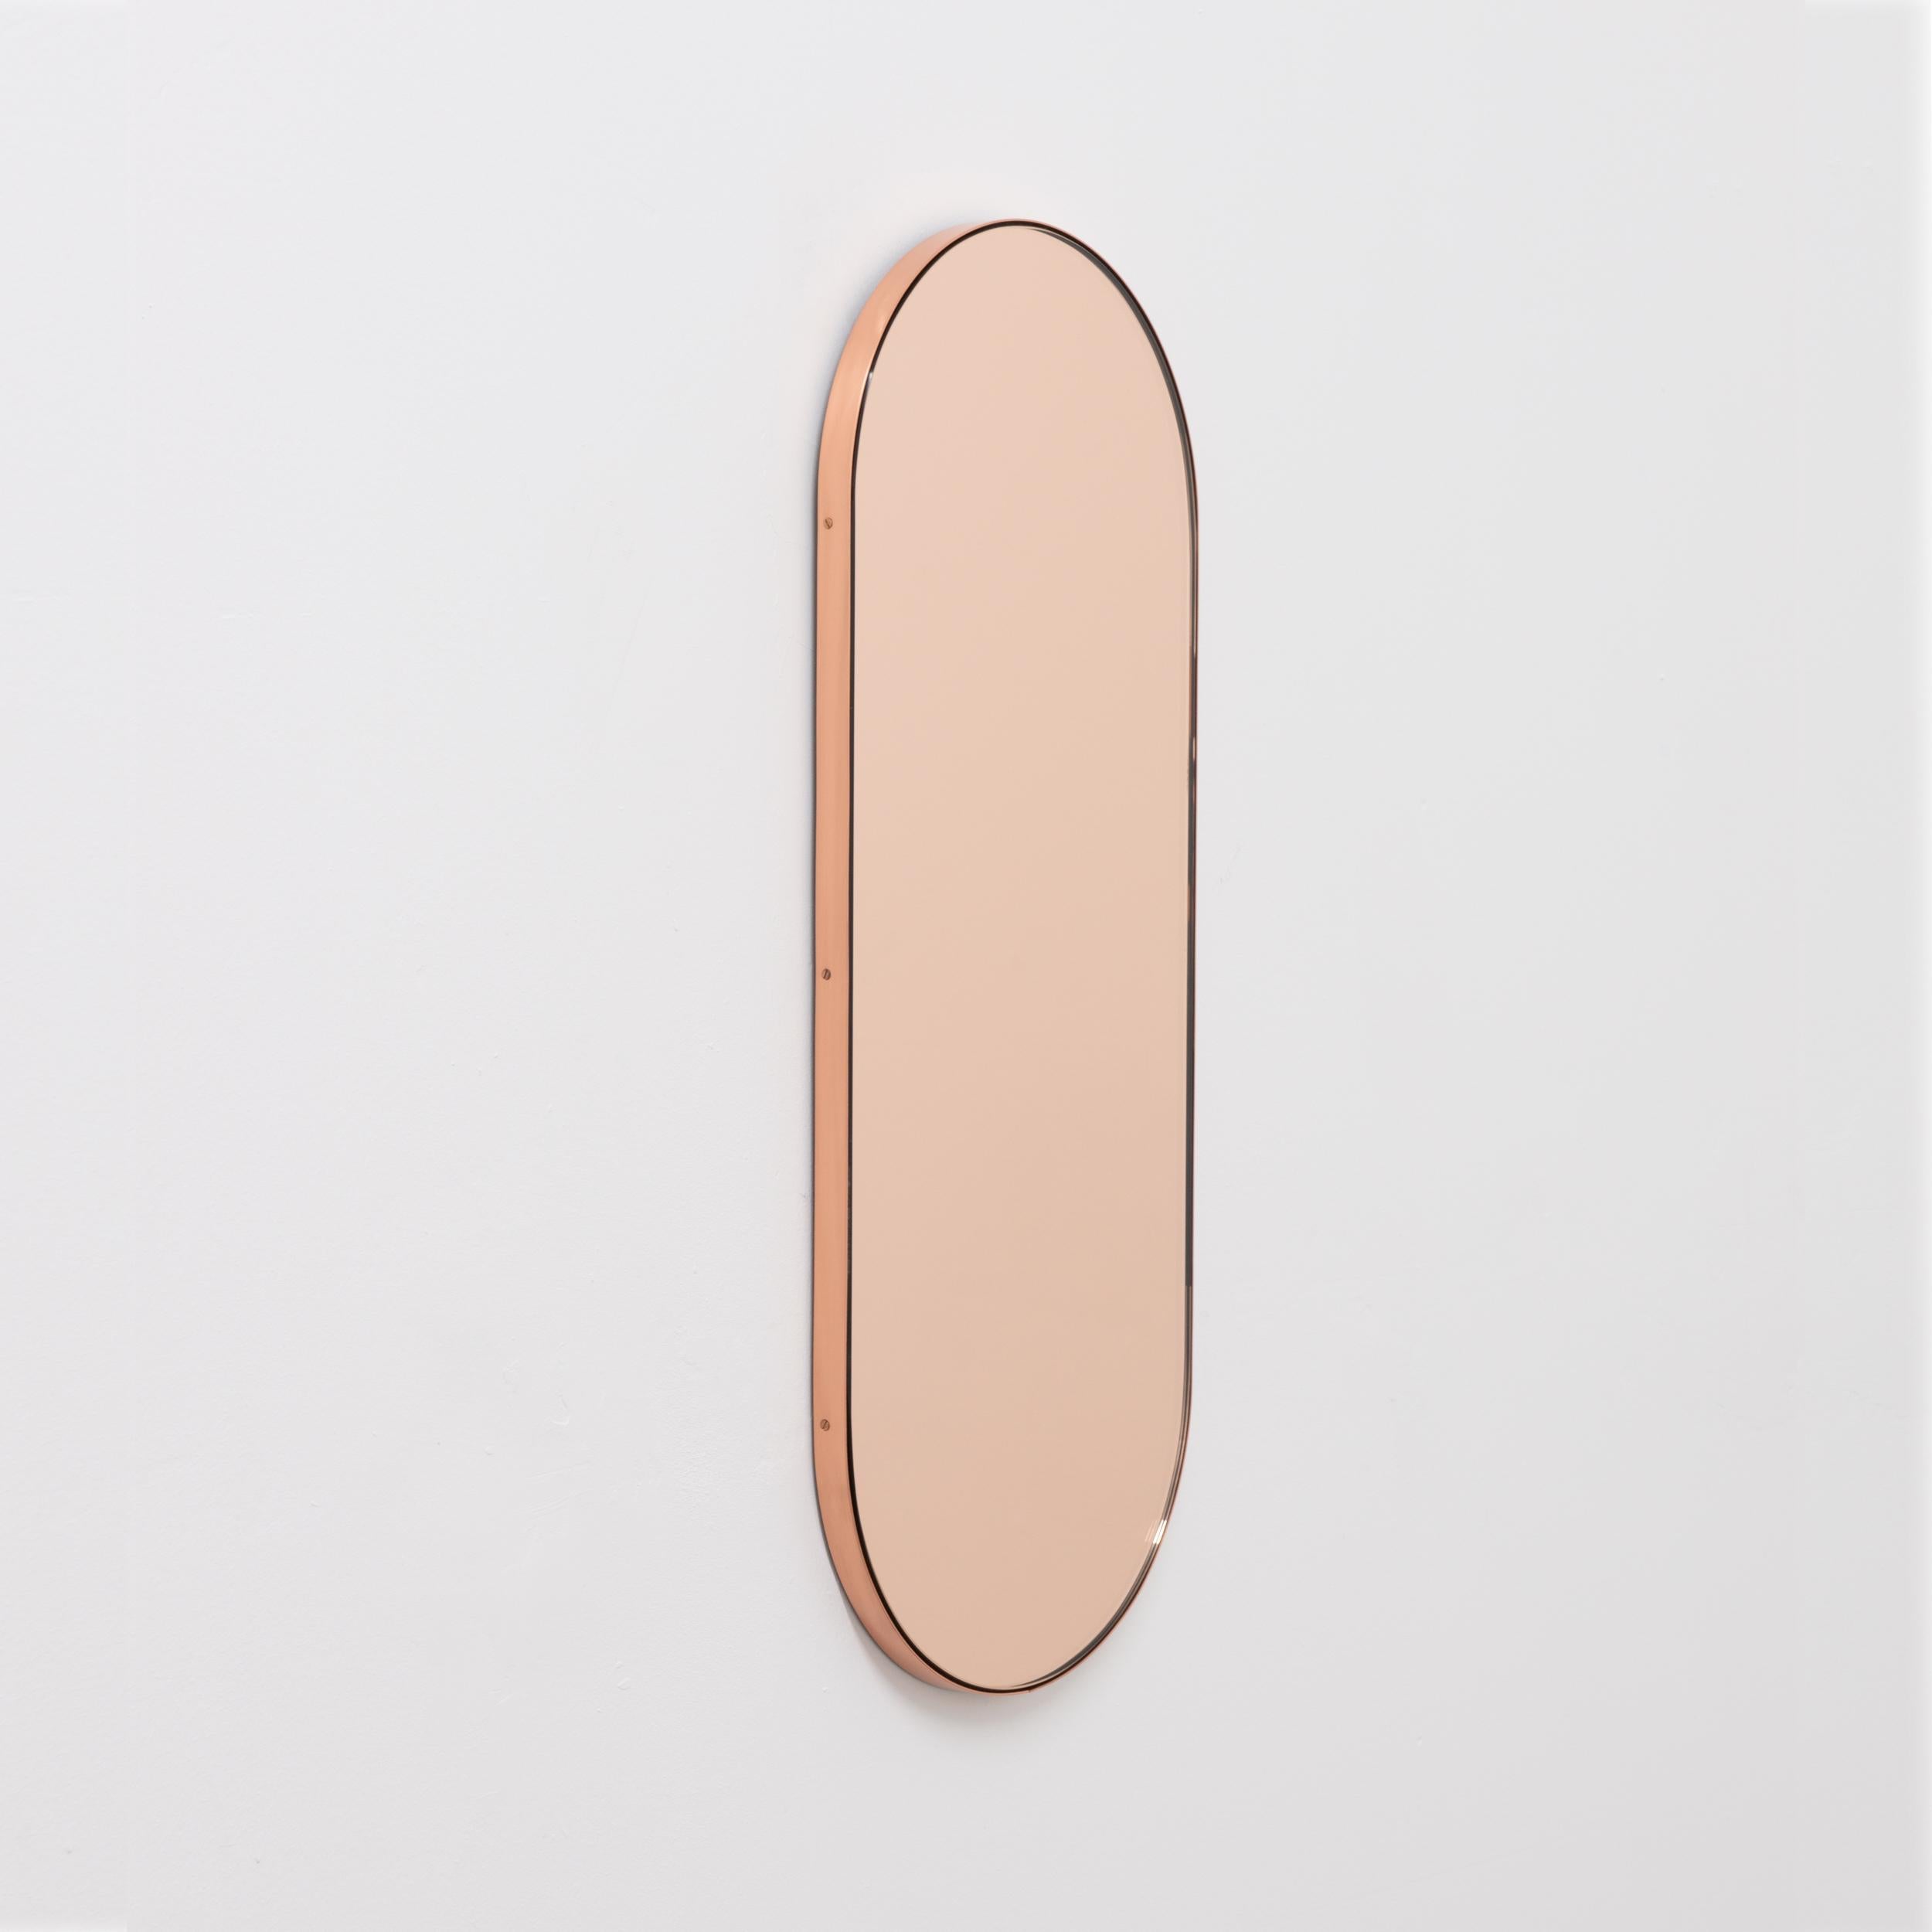 Contemporary capsule shaped rose gold or peach mirror with an elegant copper frame. Designed and handcrafted in London, UK.

Medium, large and extra-large (37cm x 56cm, 46cm x 71cm and 48cm x 97cm) mirrors are fitted with an ingenious French cleat